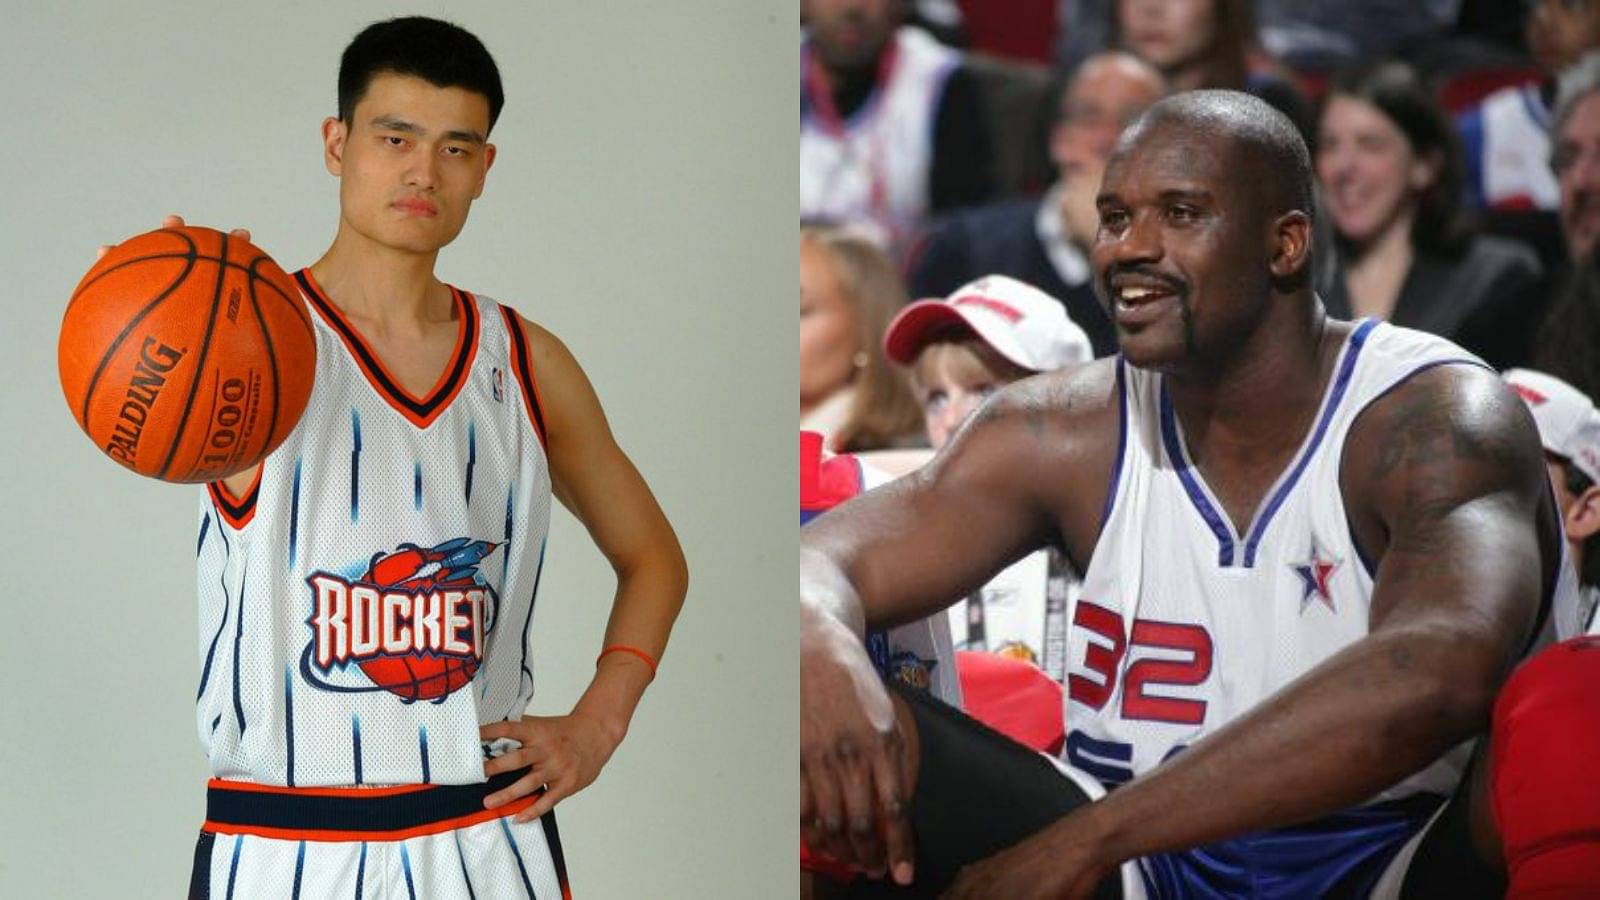 “Shaquille O’Neal is going to dunk on that Chinese guy as much as humanly possible”: Bill Simmons had to eat his words after Yao Ming dominated Lakers star more than anyone else